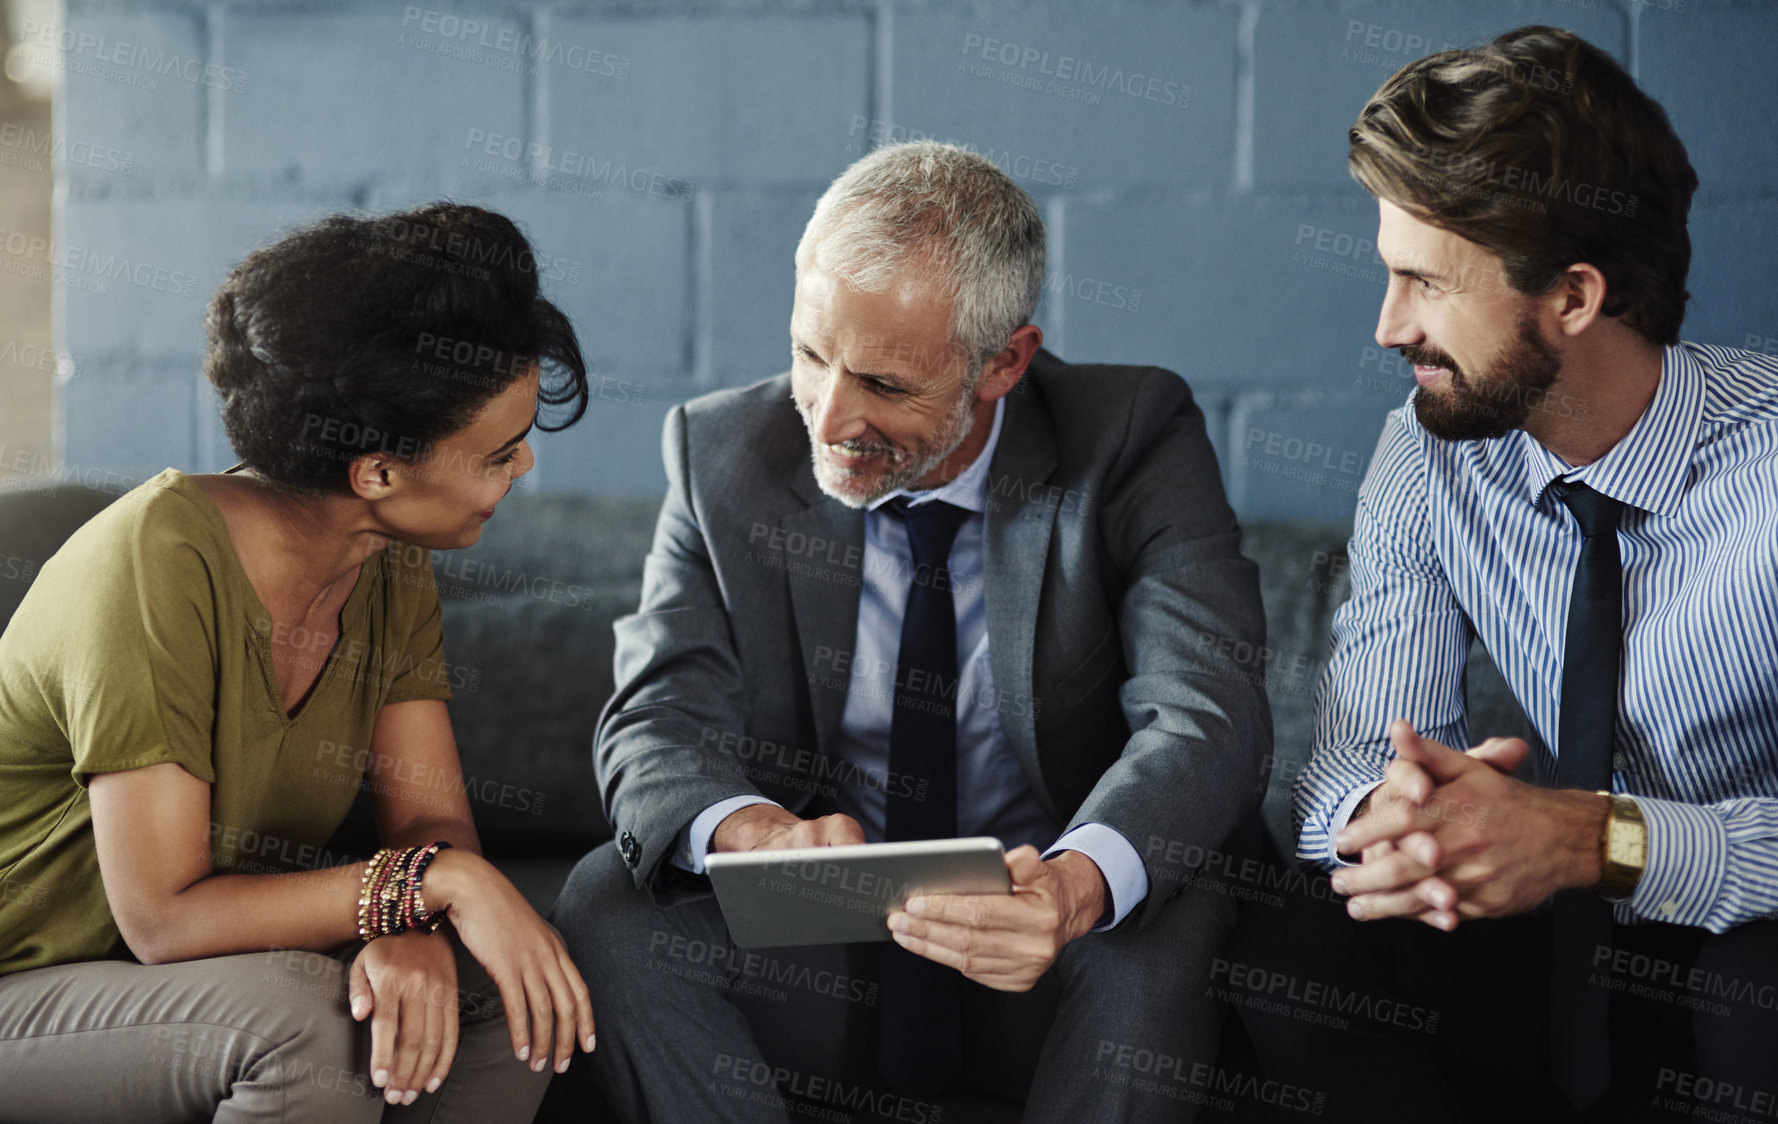 Buy stock photo Cropped shot of three businesspeople working together on a digital tablet in their office